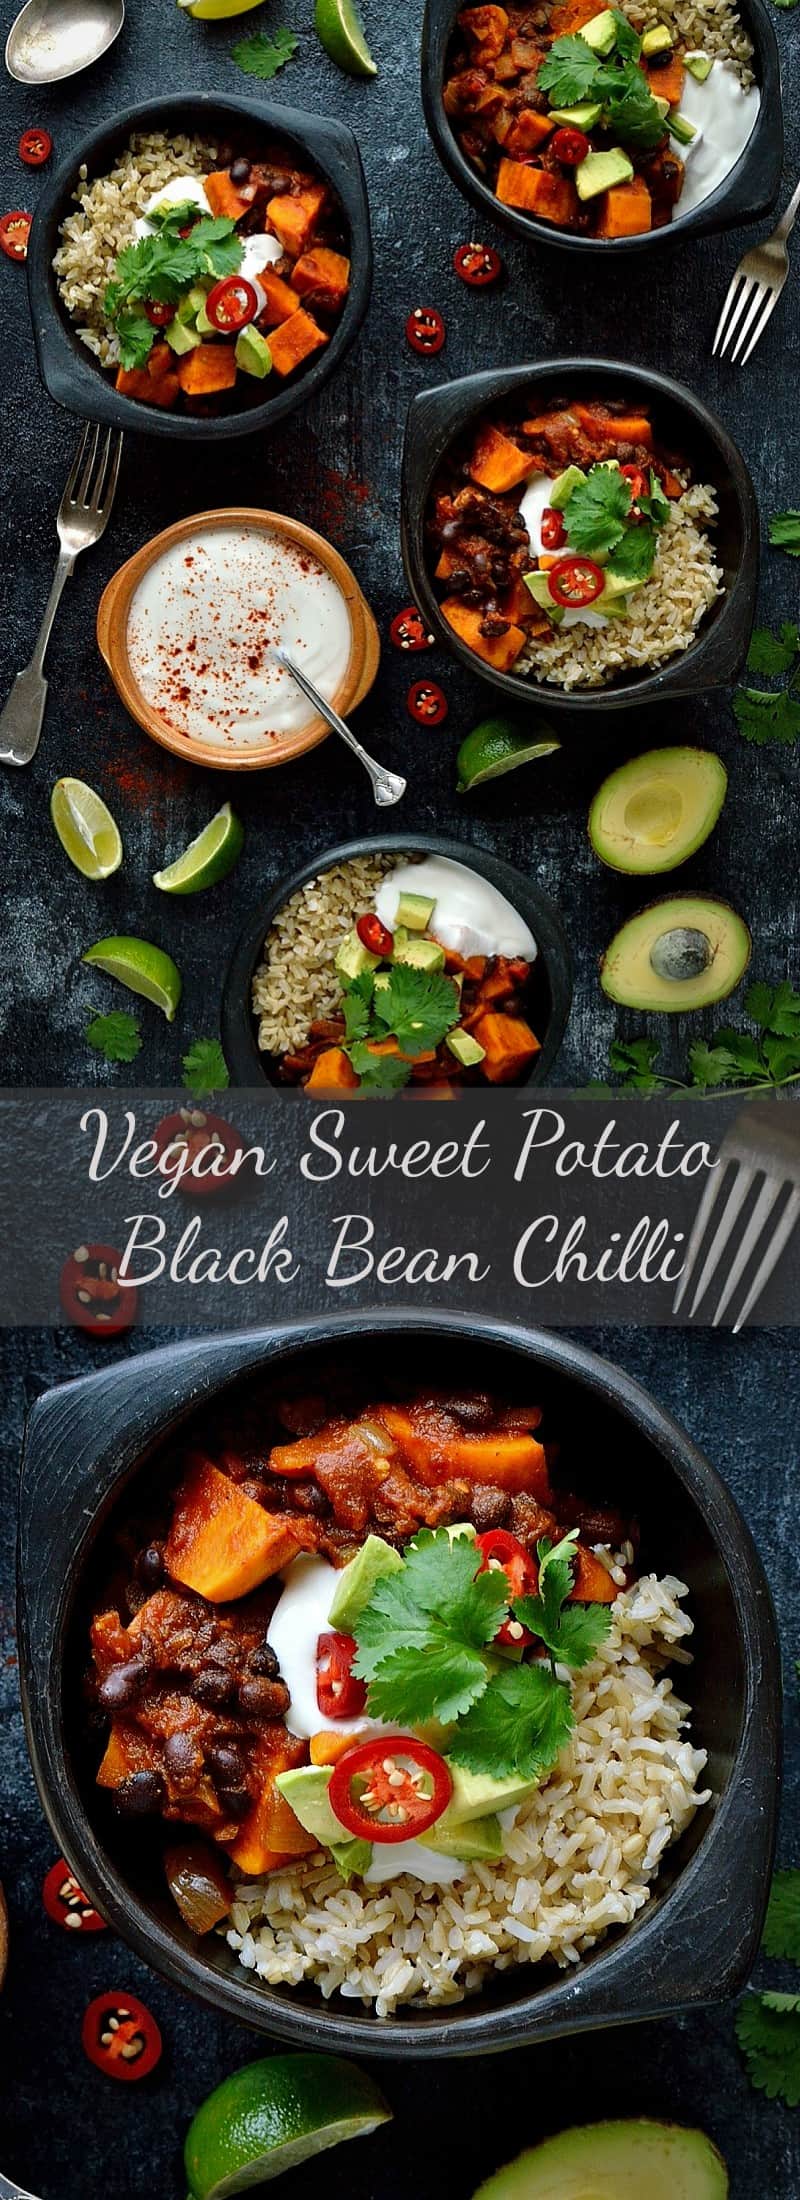 Sweet potato black bean chilli - a hearty, warming, healthy and delicious vegan meal.